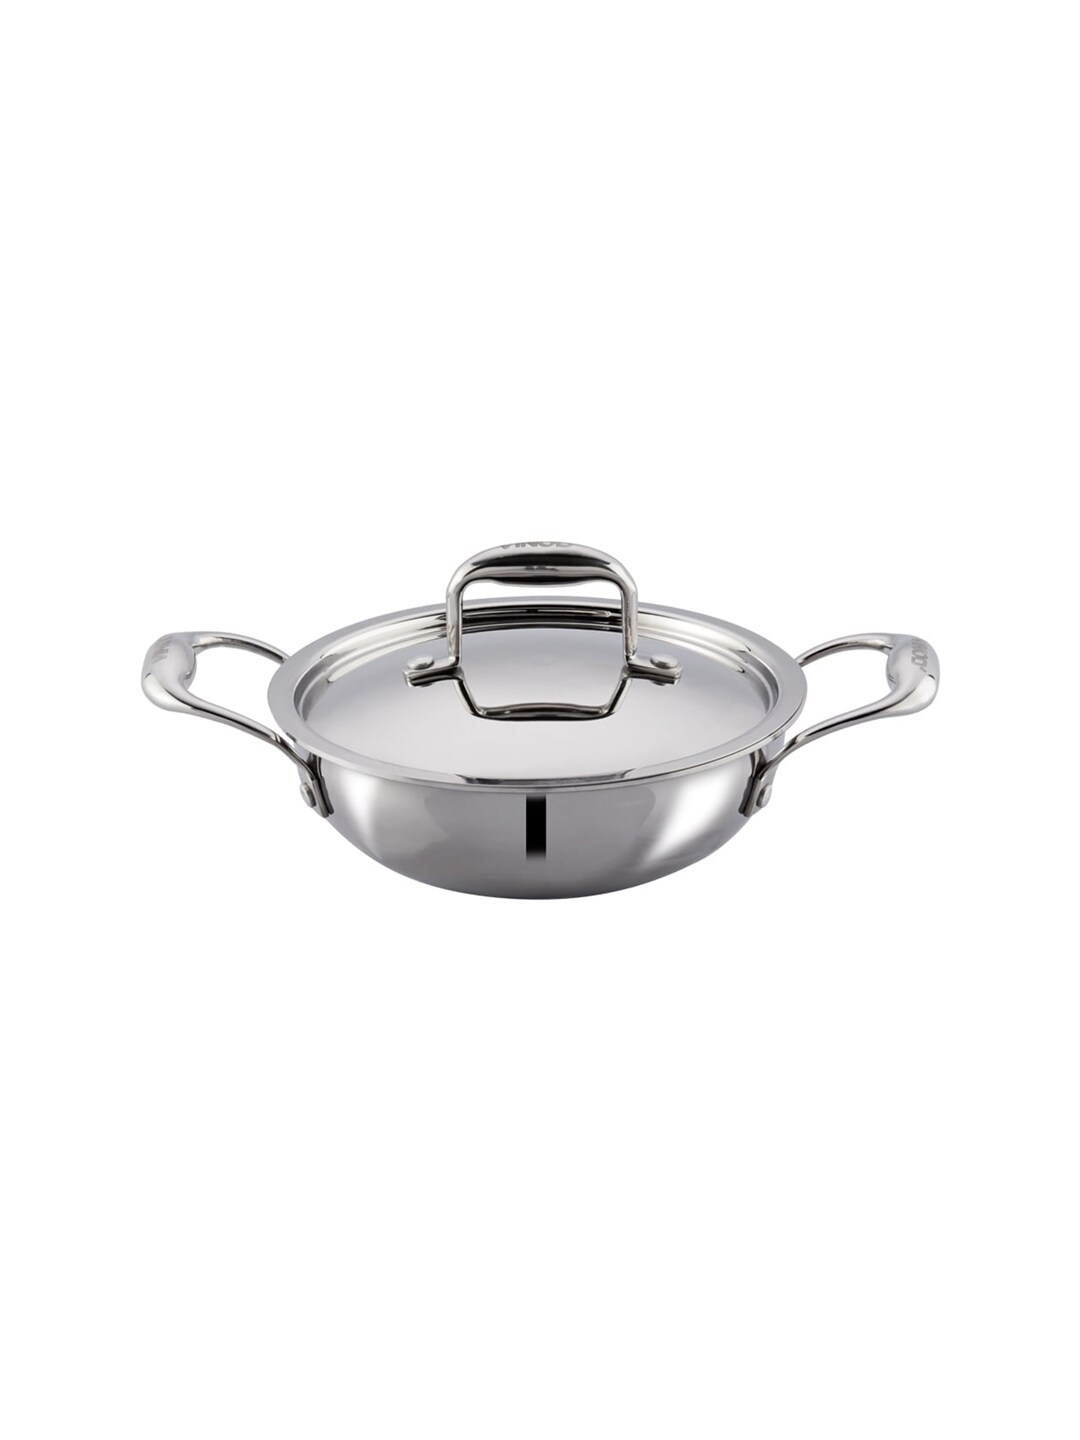 Vinod Silver-Toned Platinum Triply Induction Friendly Stainless Steel Kadhai or Wok Price in India